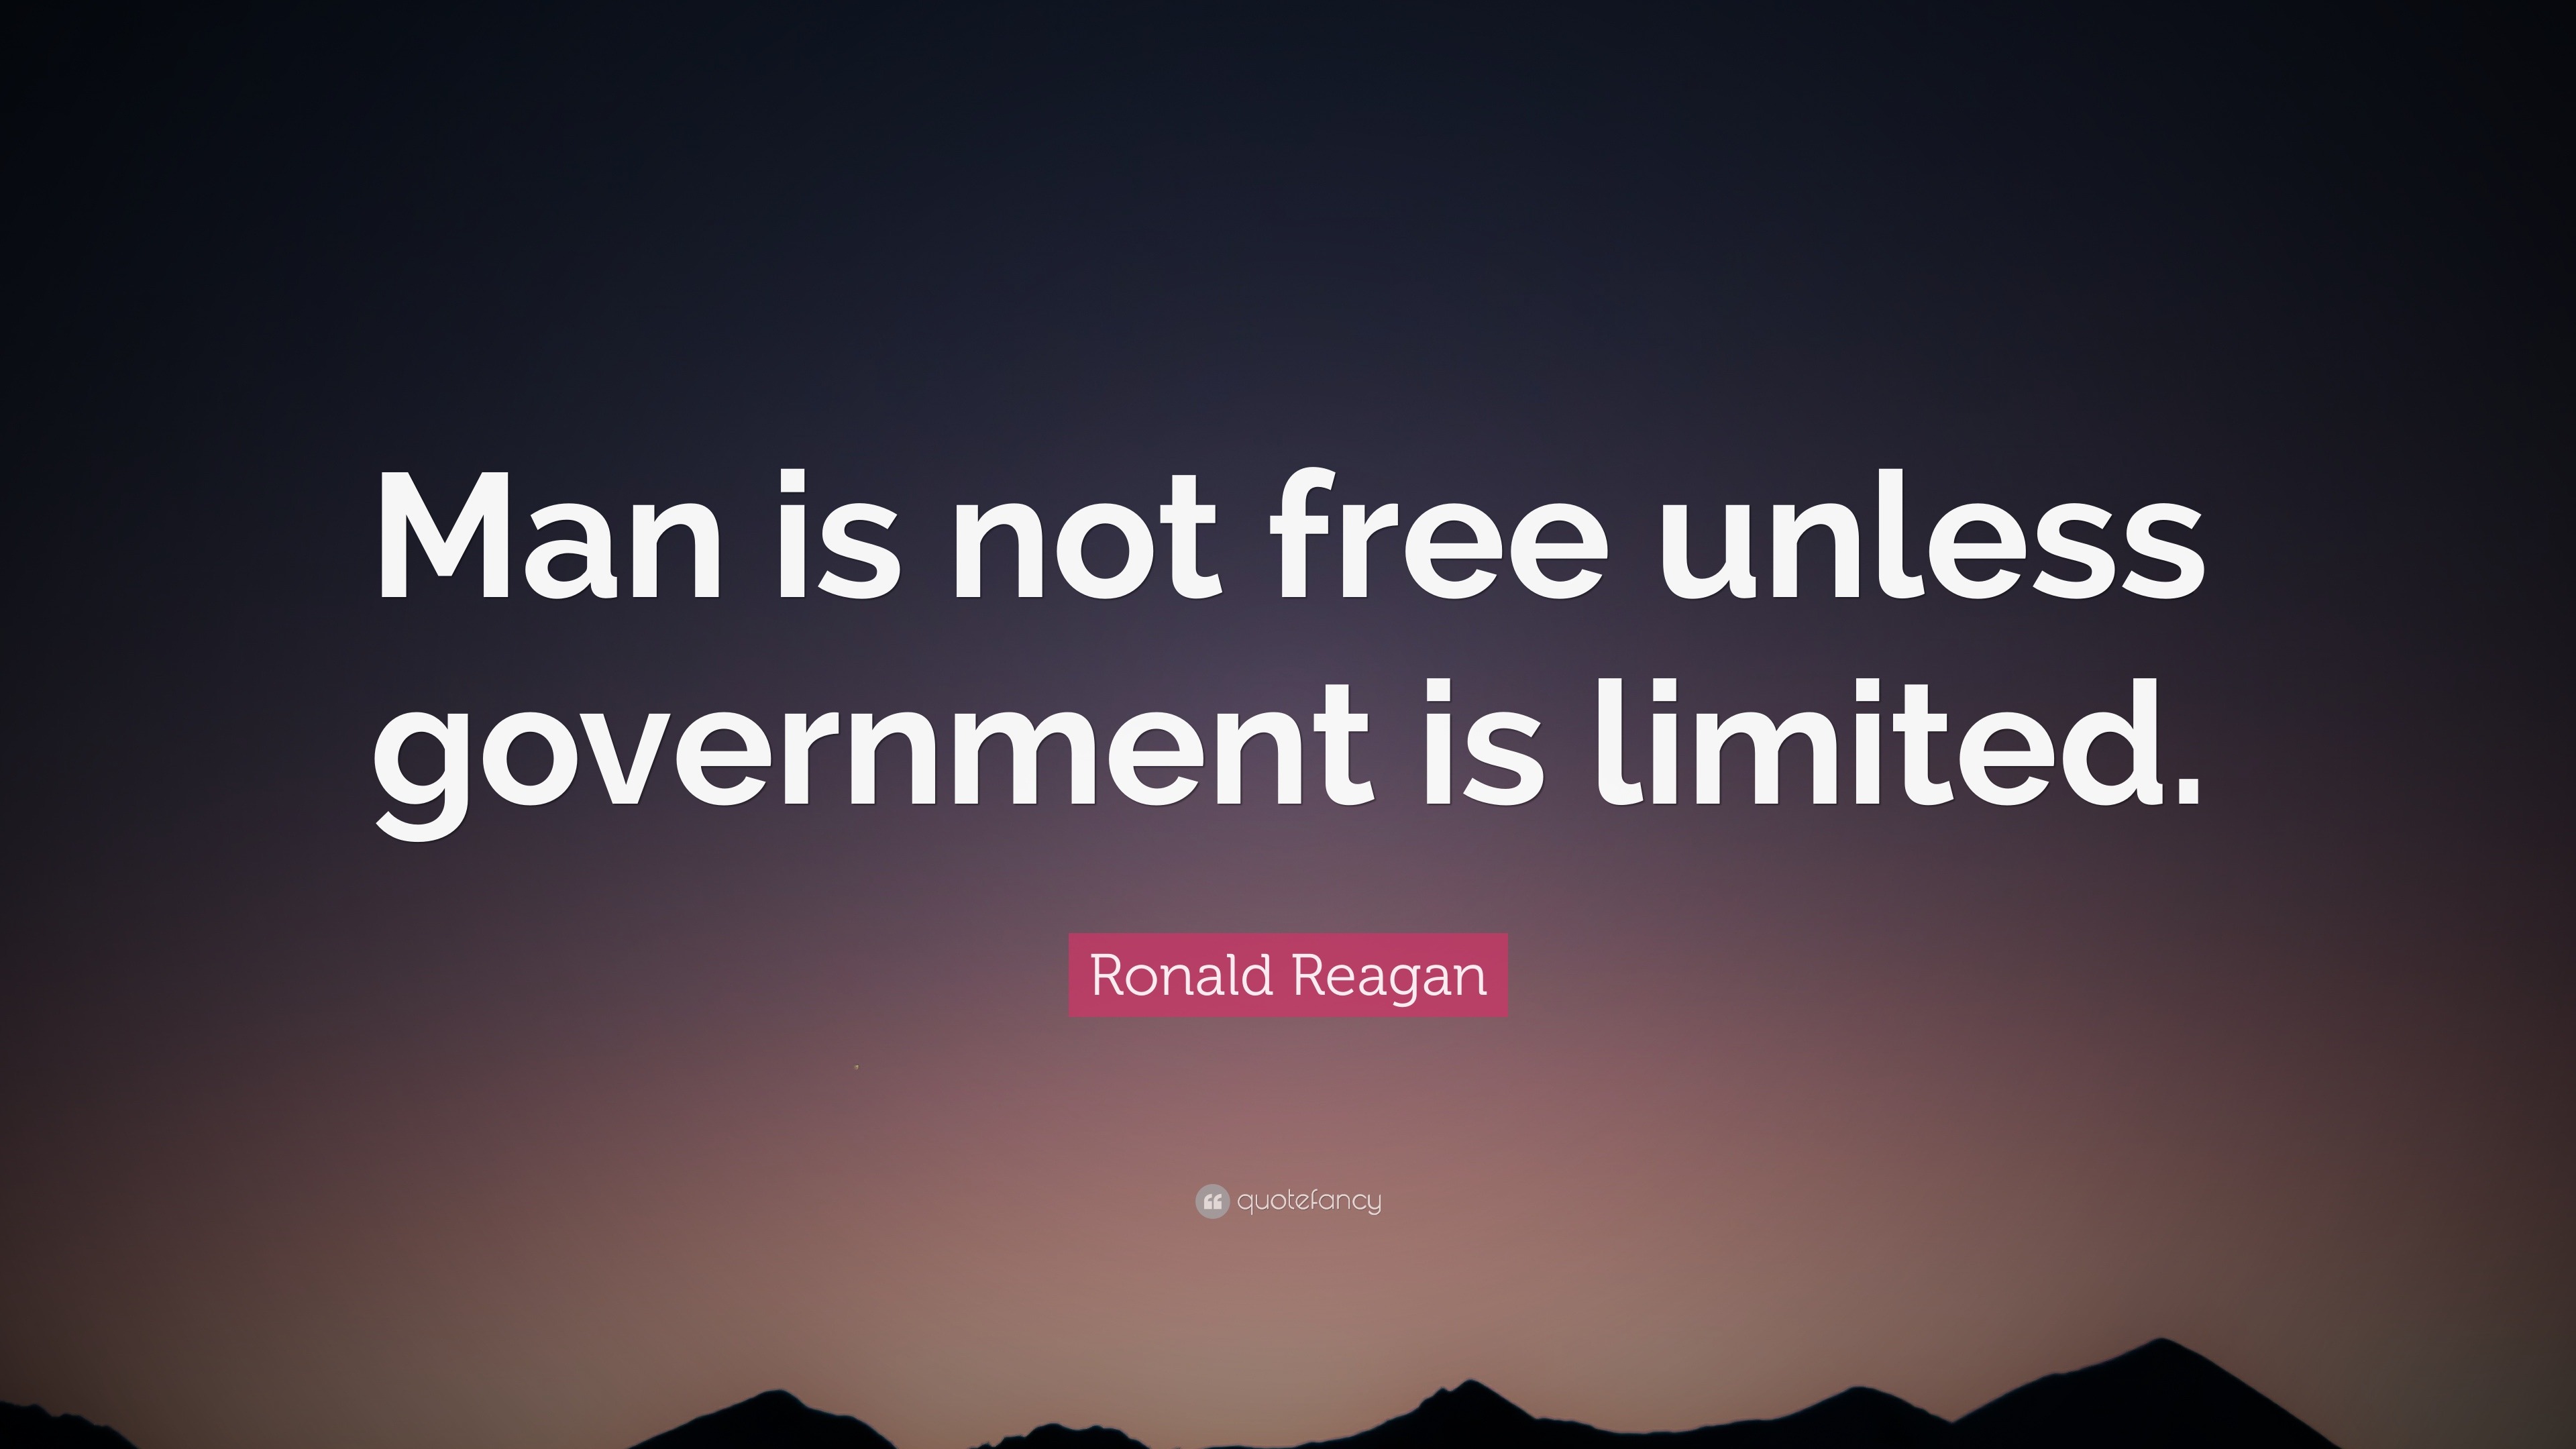 Ronald Reagan Quote “Man is not free unless government is limited.”